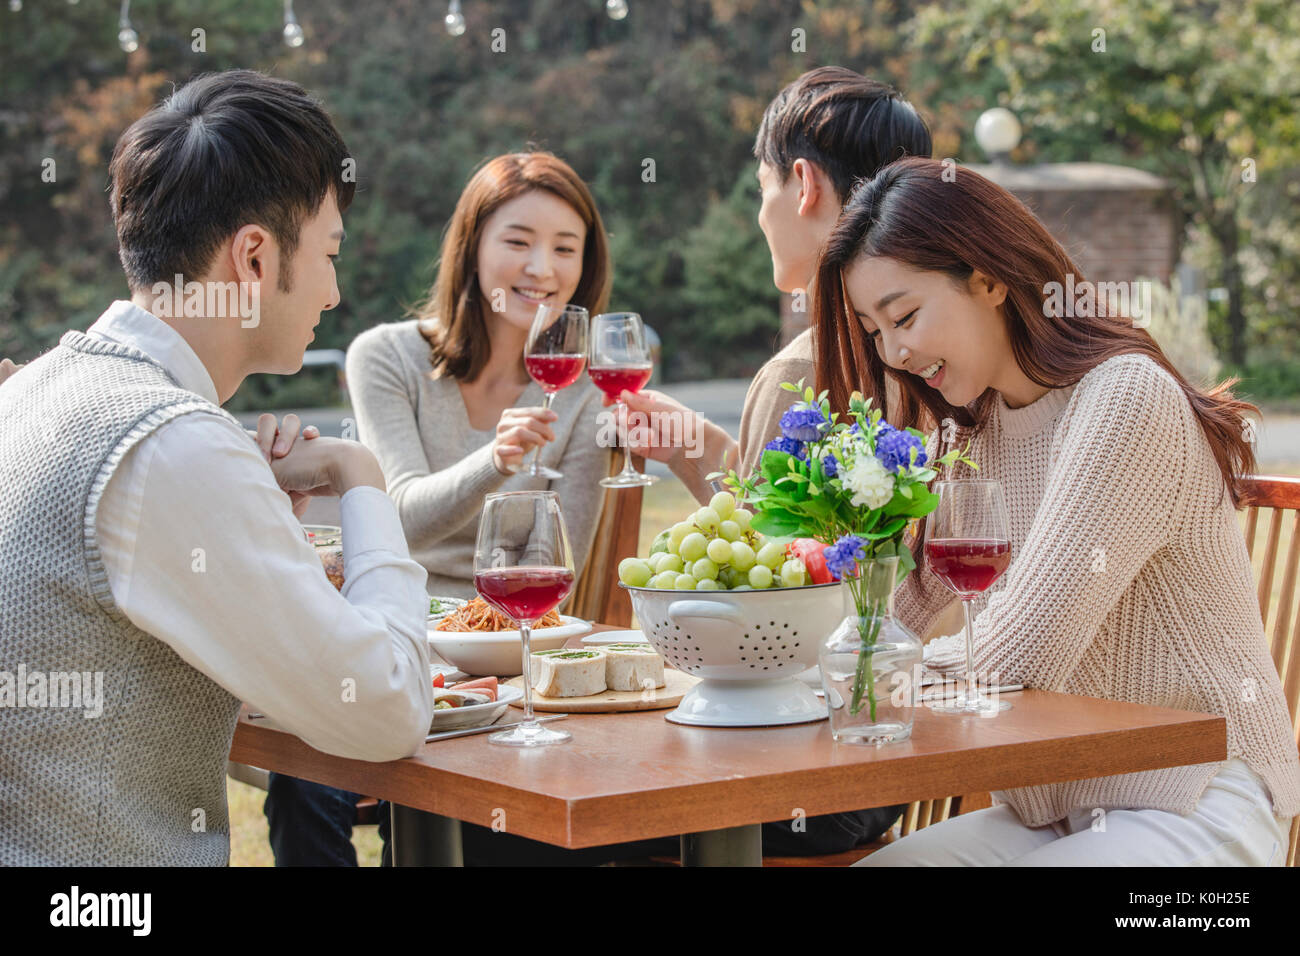 Young smiling people enjoying a party at garden Stock Photo